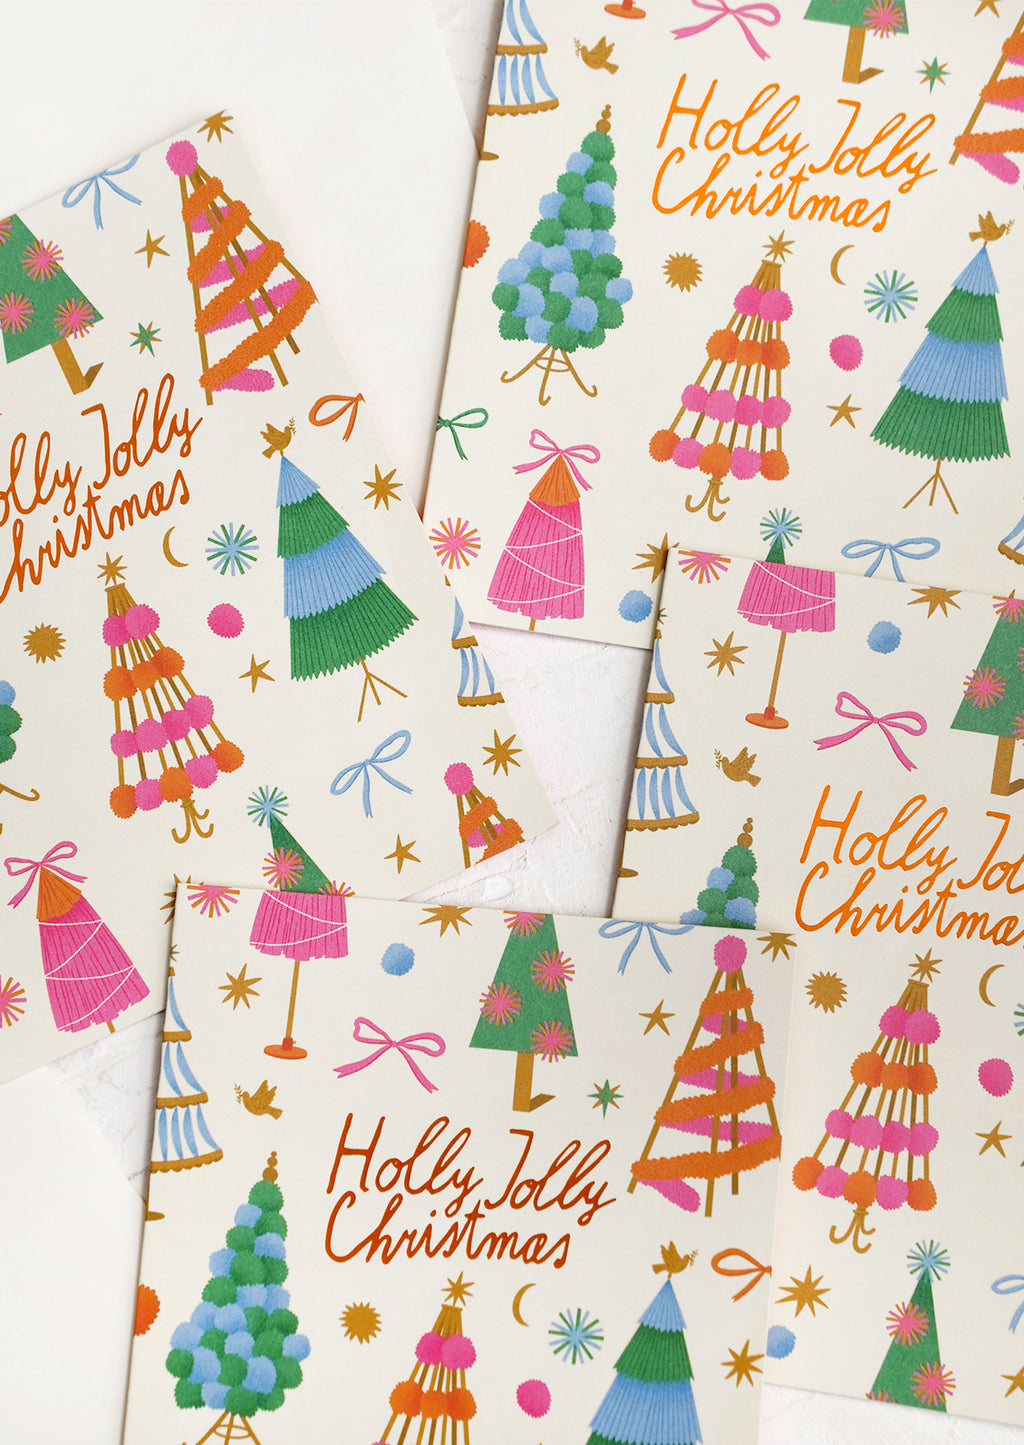 1: A colorful tree print card set reading "Holly jolly christmas".